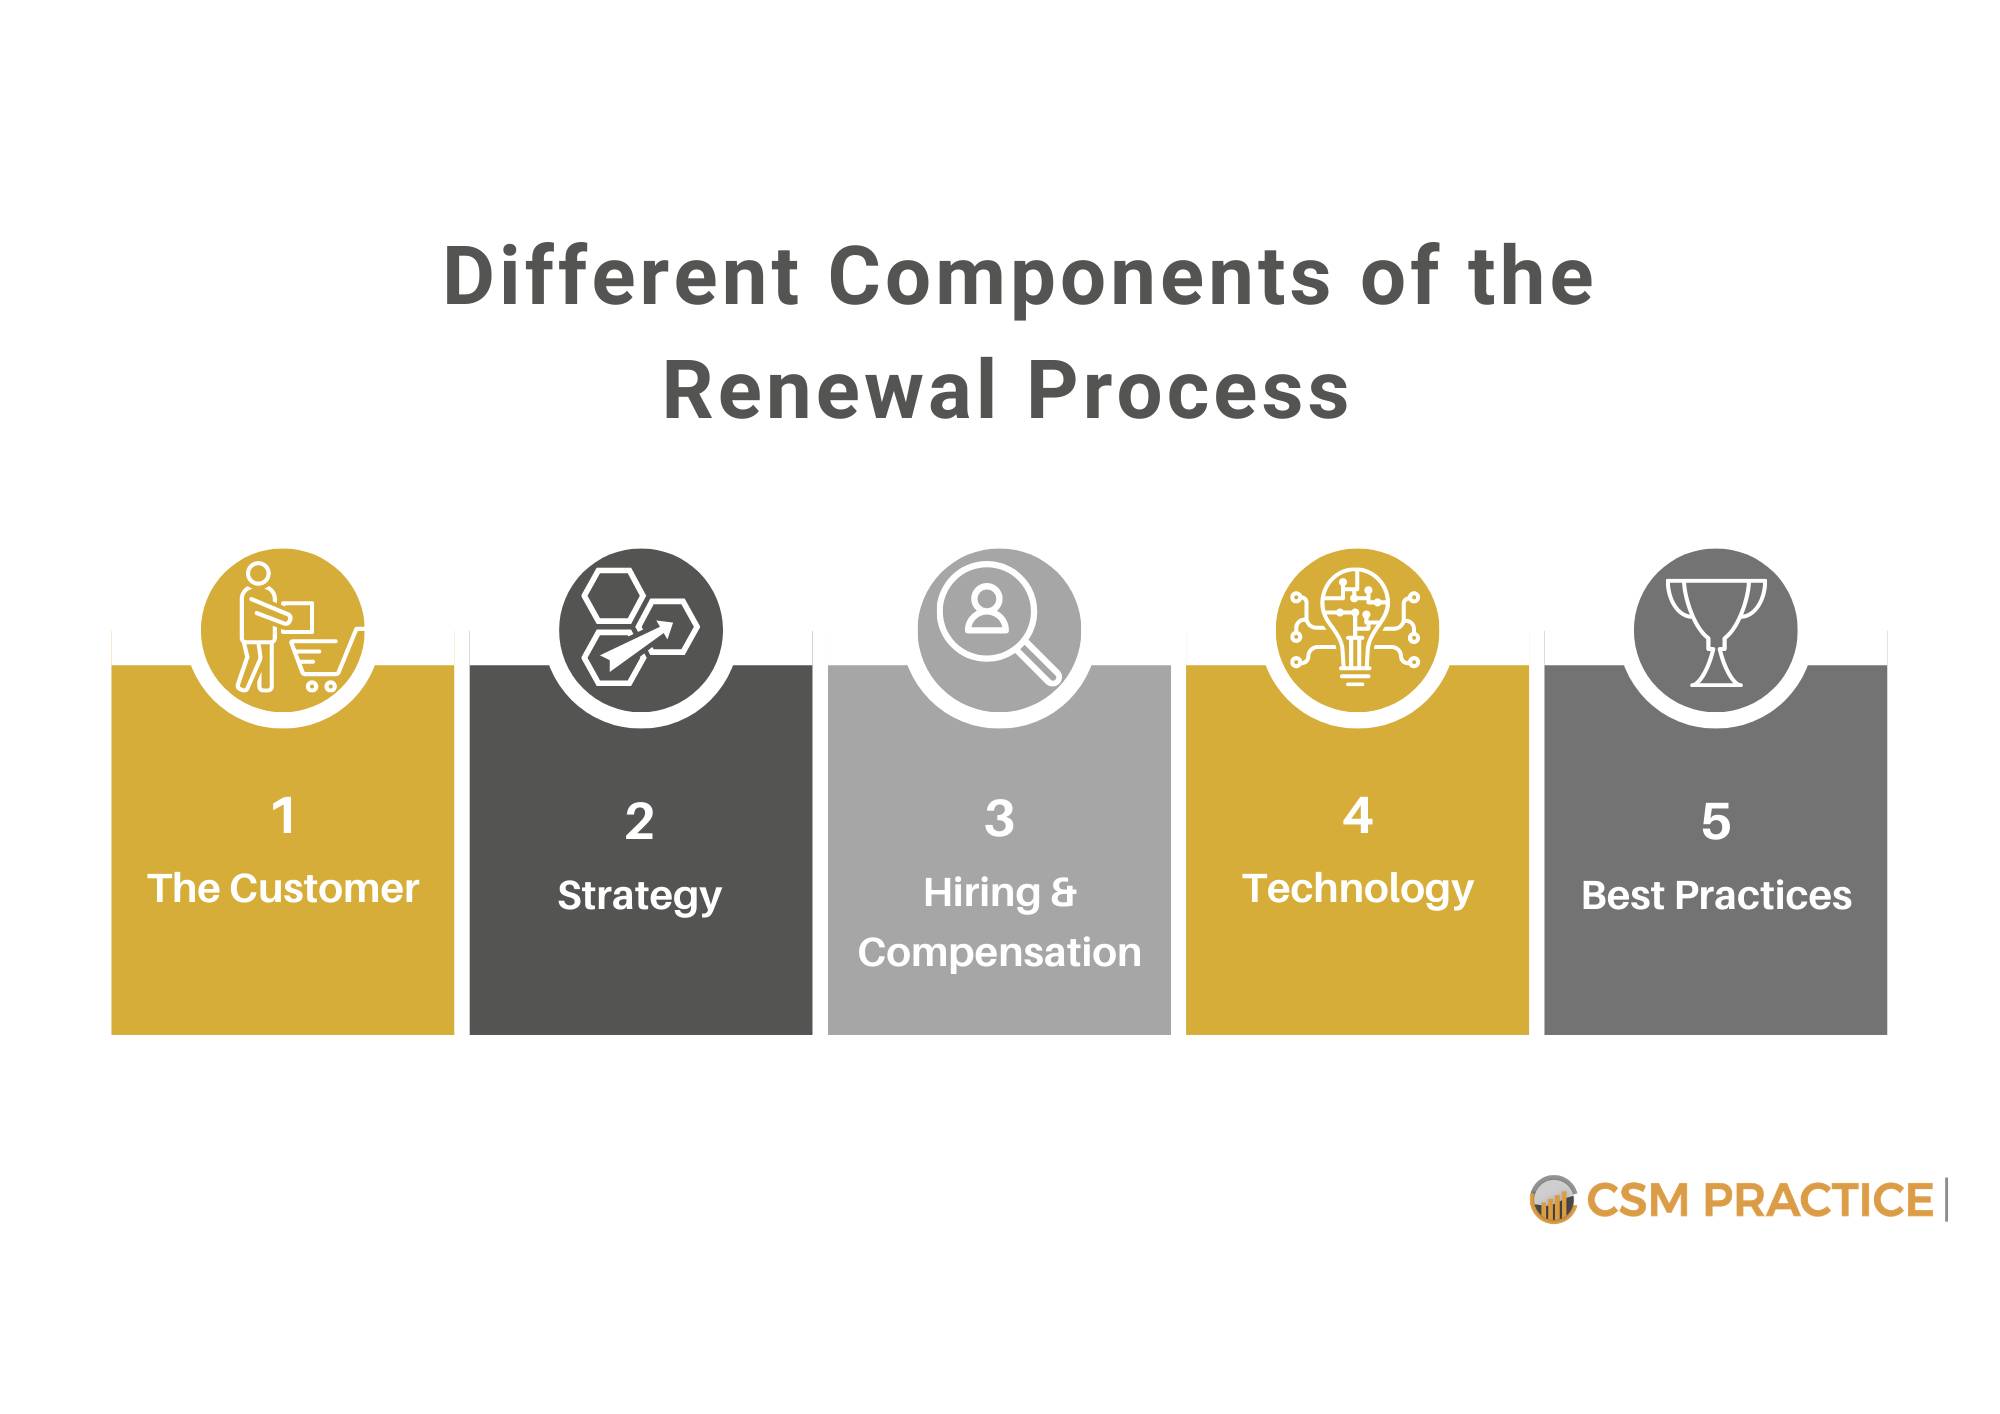 How to Scale the Customer Renewal Process Effectively